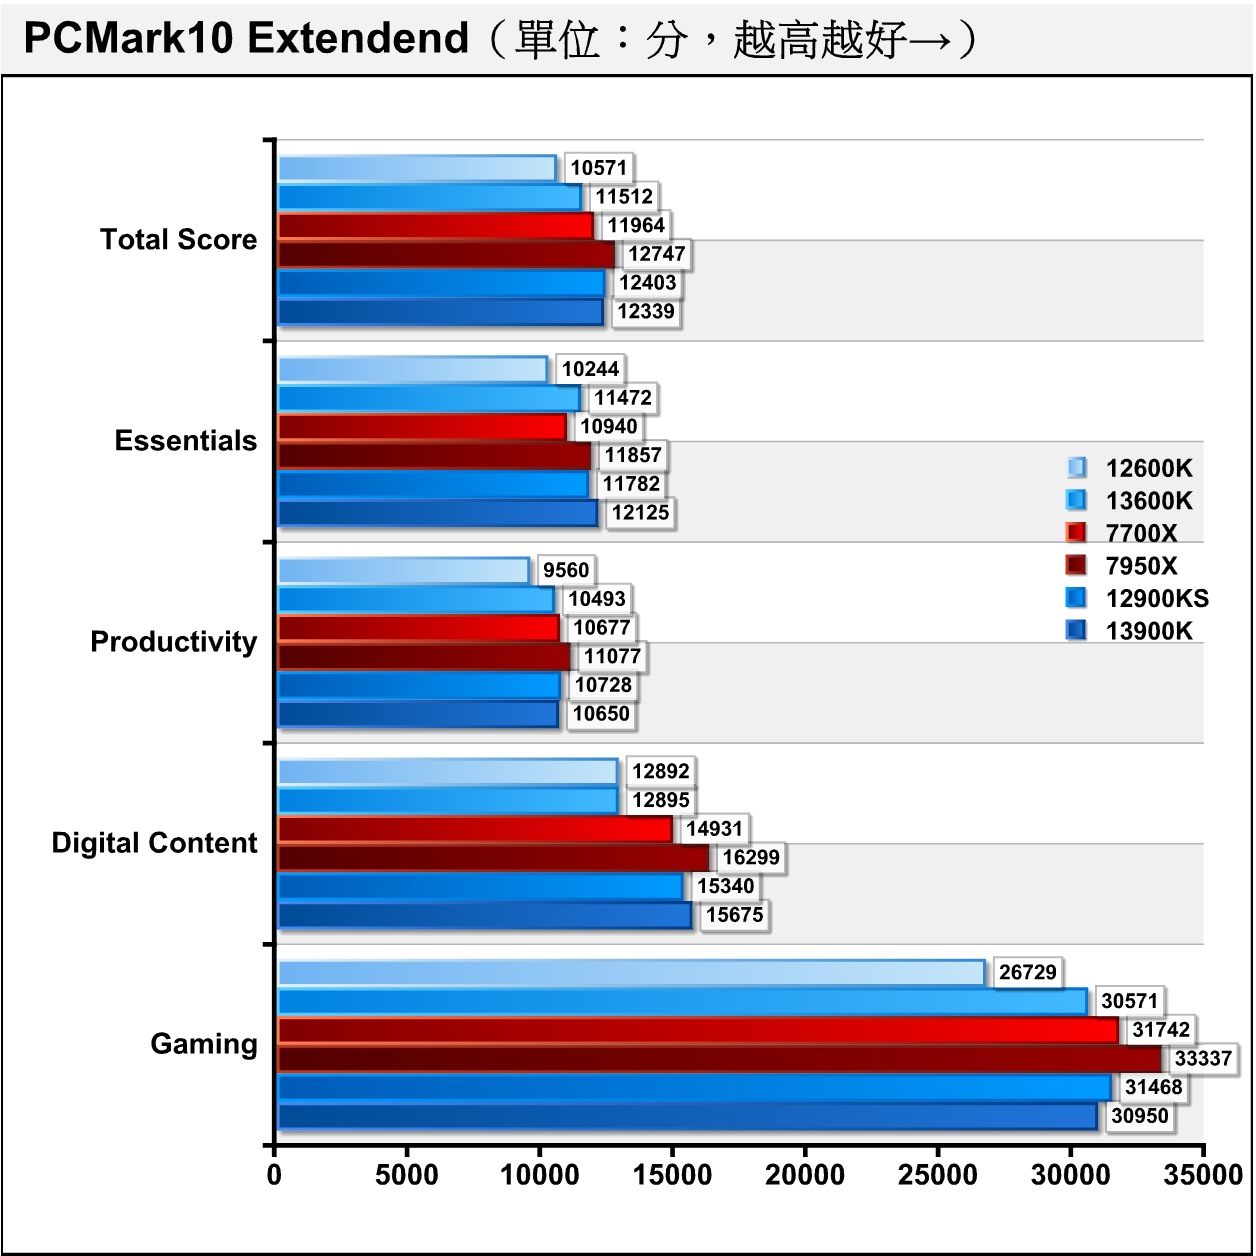 In the comprehensive performance test item PCMark10 Extendend, the total score was won by the Ryzen 9 7950X, but the Core i9-13900K followed closely, with a drop of only 3.2%.